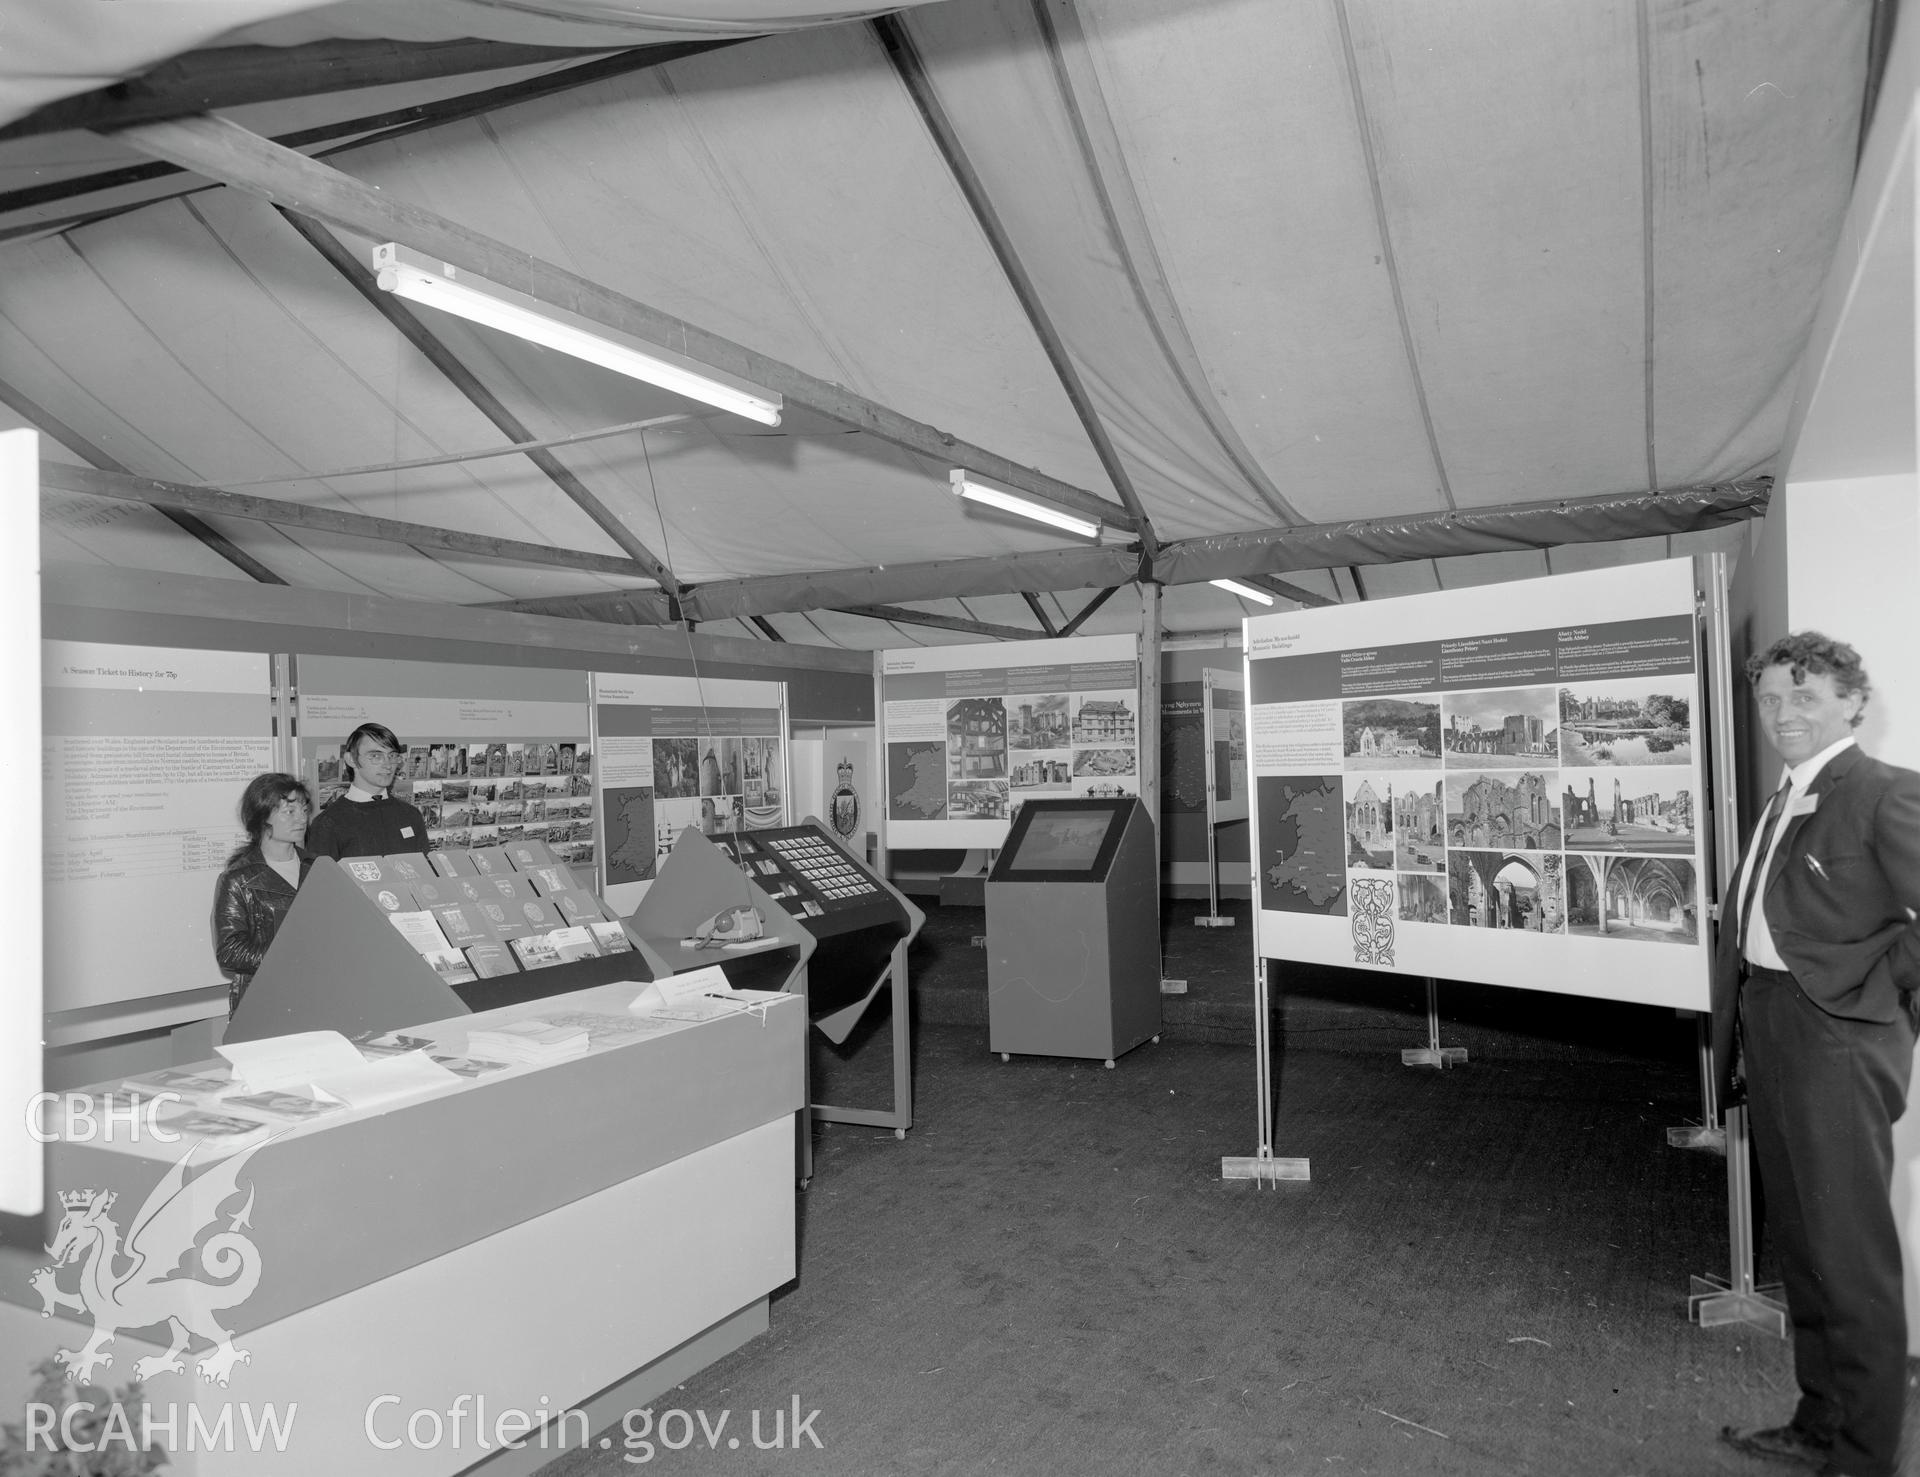 Digitised copy of a black and white negative showing Ancient Monuments Exhibition, Welsh Tourer, Haverfordwest (Eisteddfod Site).